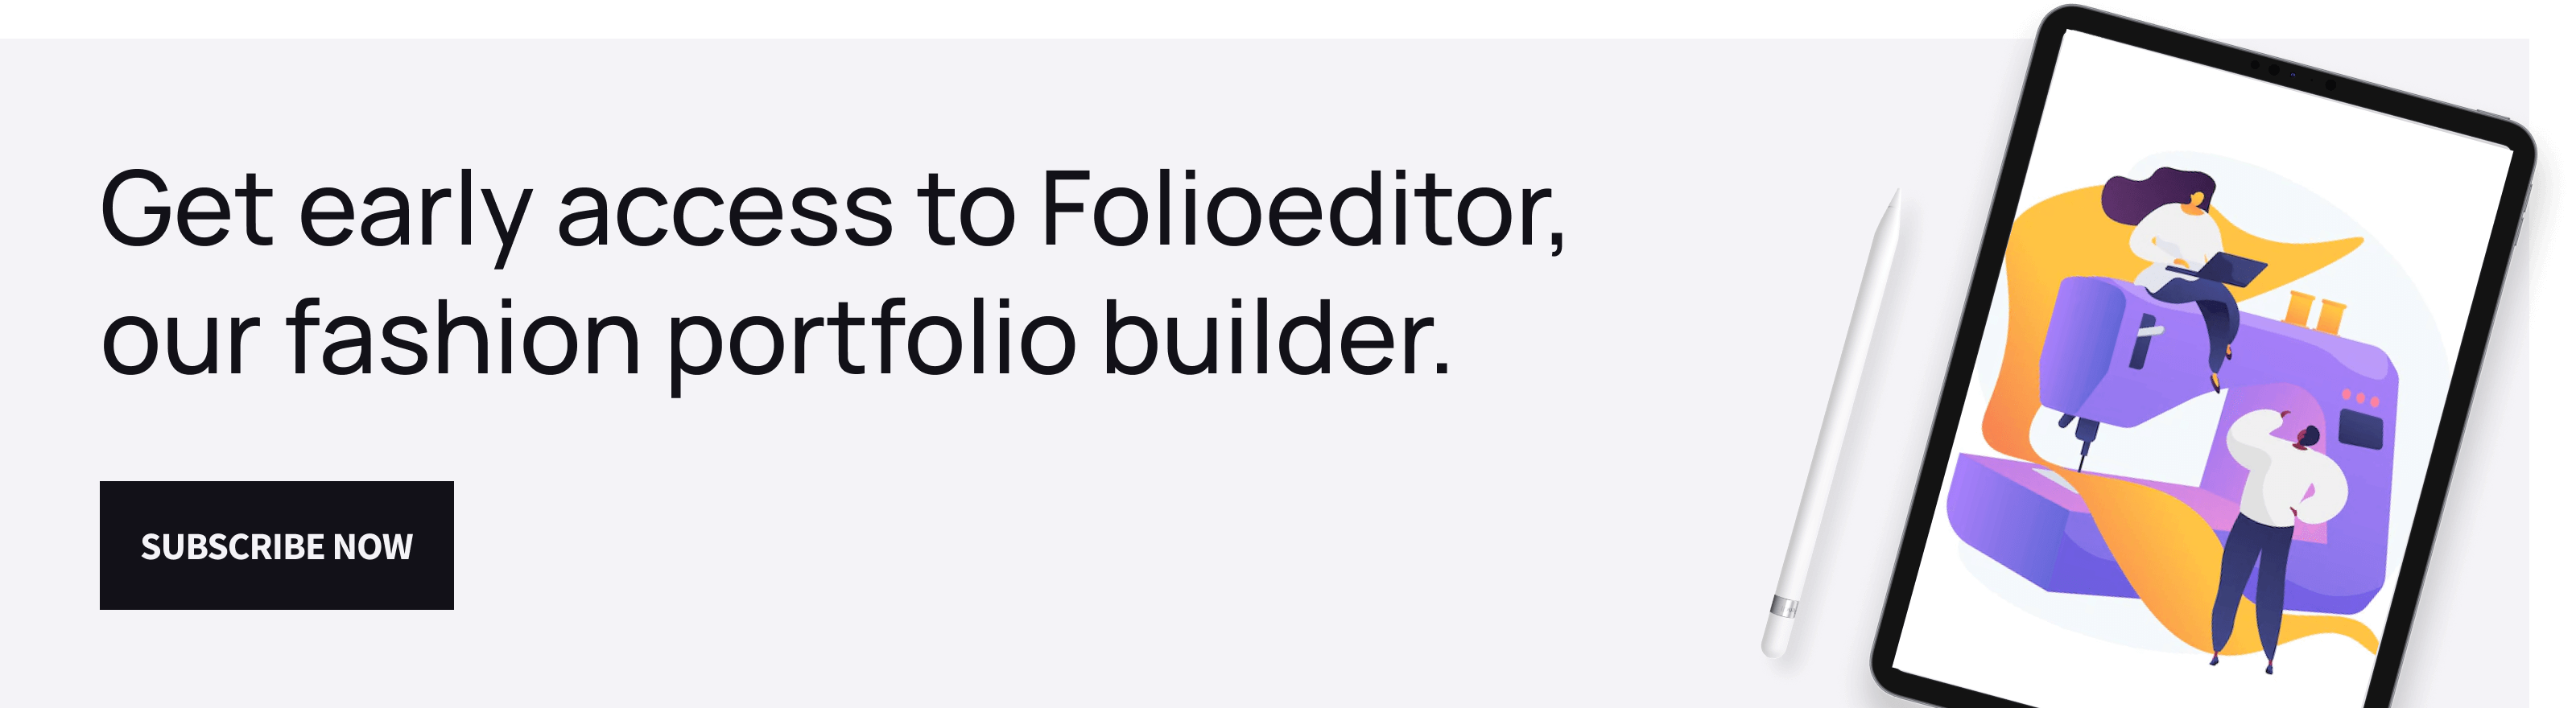 A banner saying "get early access to Folioeditor, our fashion portfolio builder."